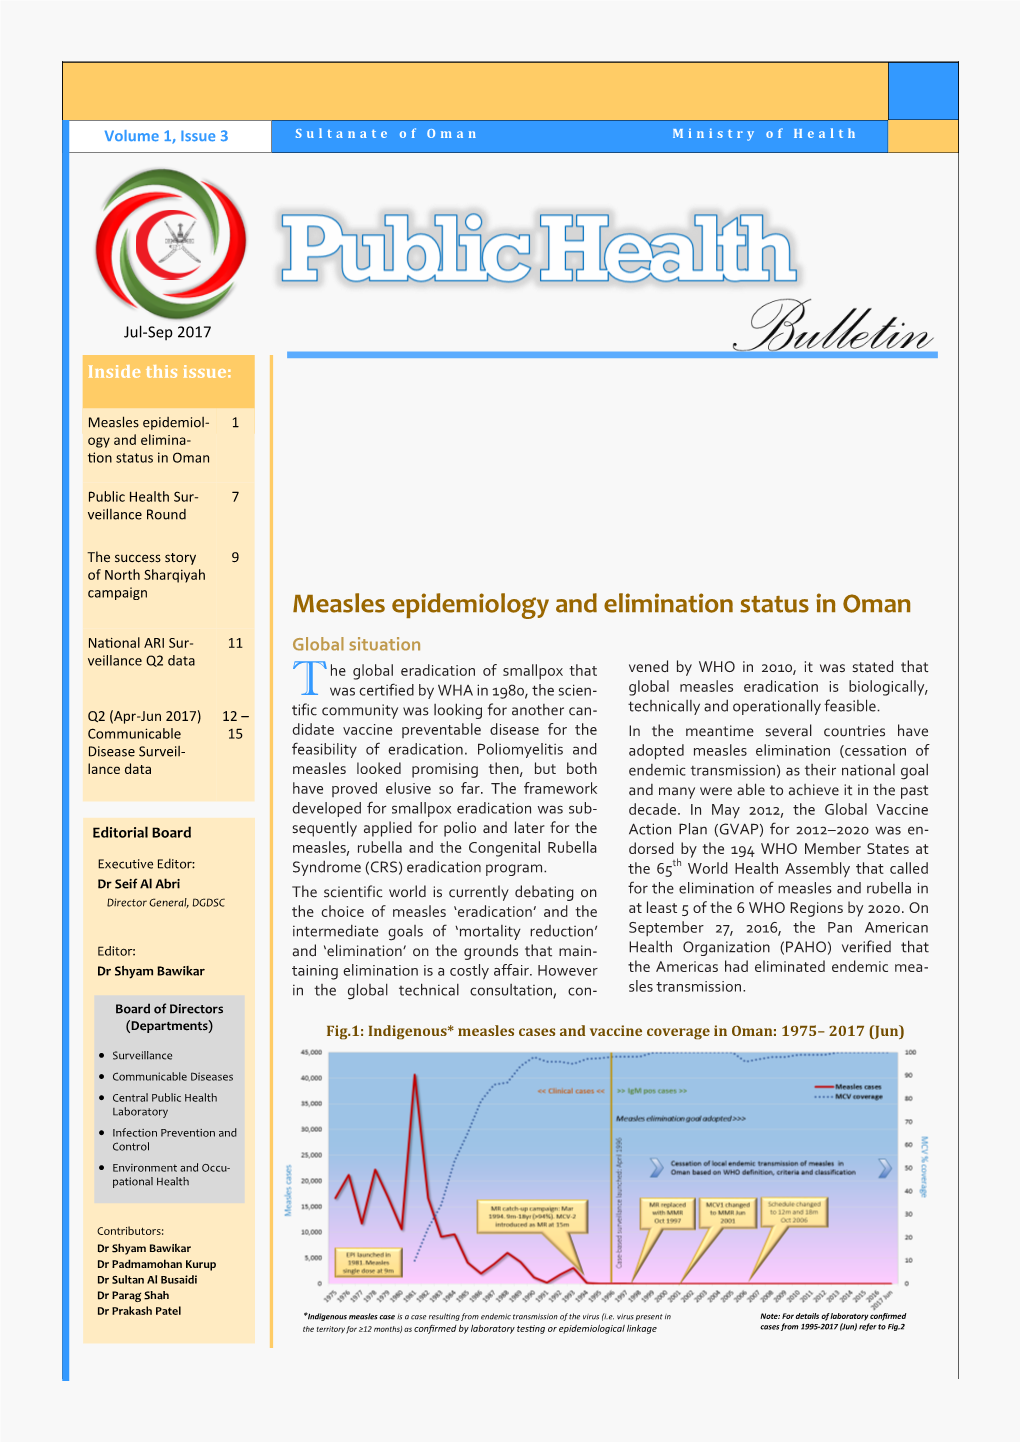 Measles Epidemiology and Elimination Status in Oman